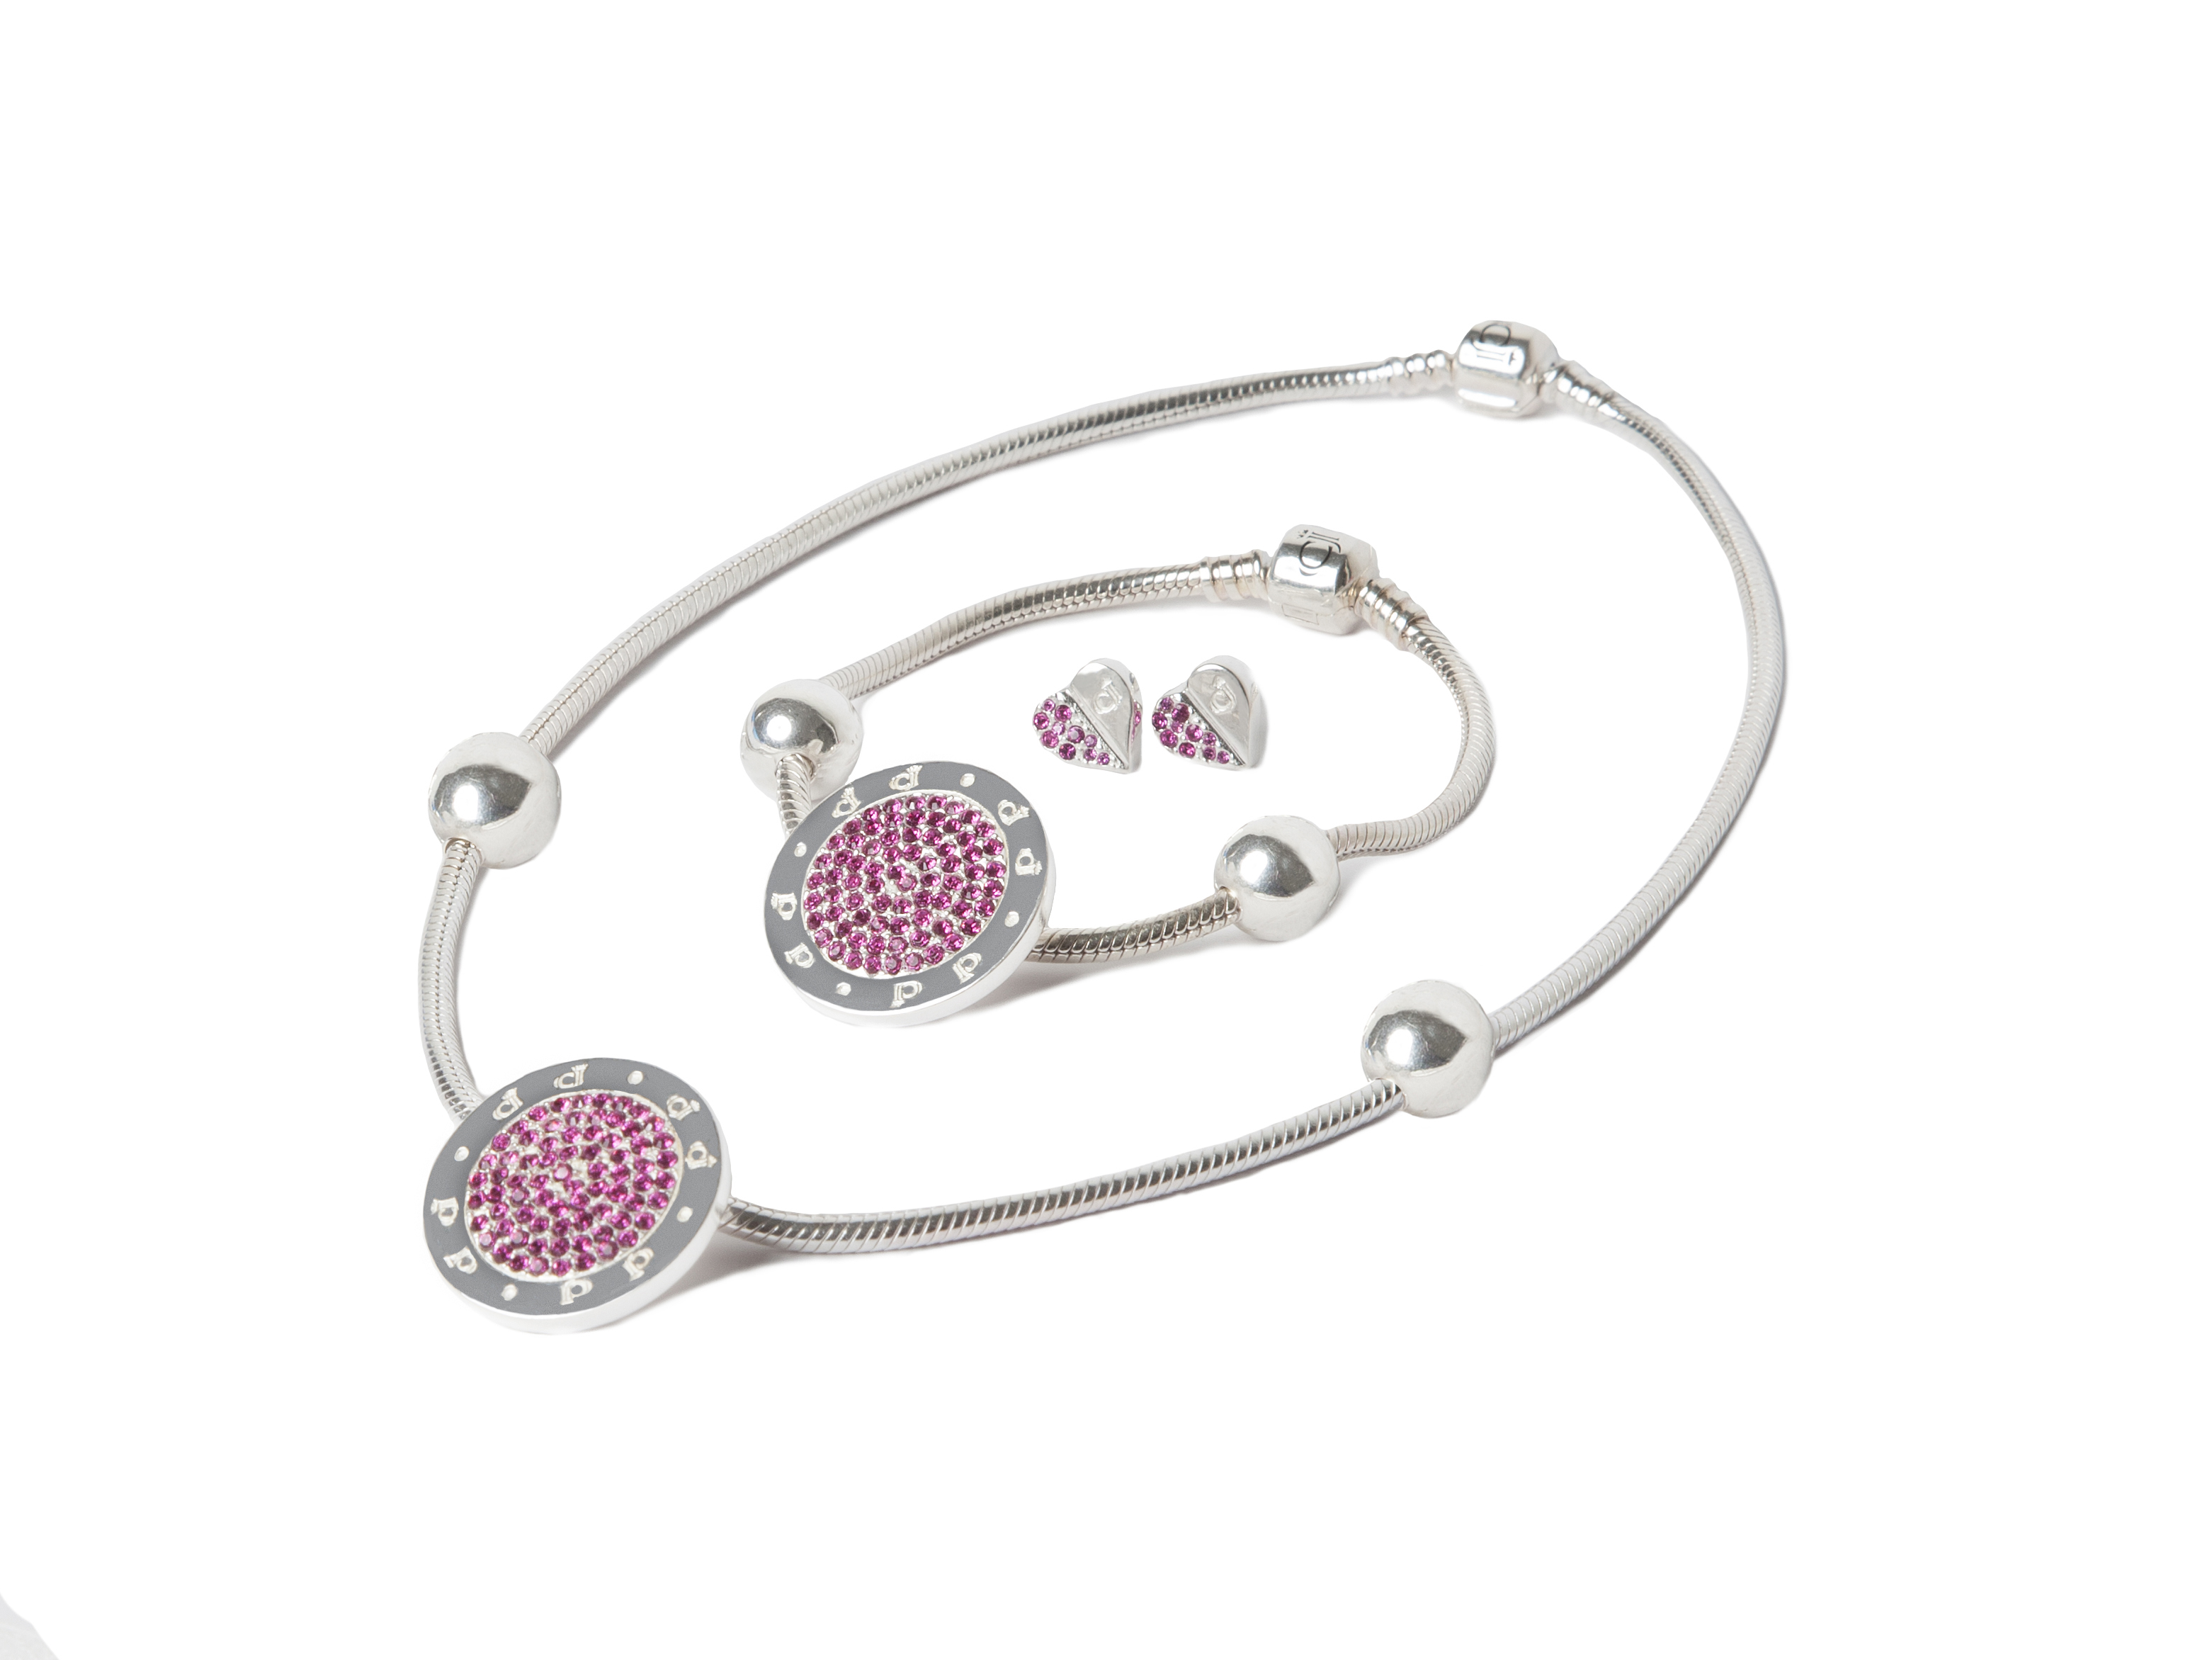 The CJ Silver Charm Collection Lovely Pink